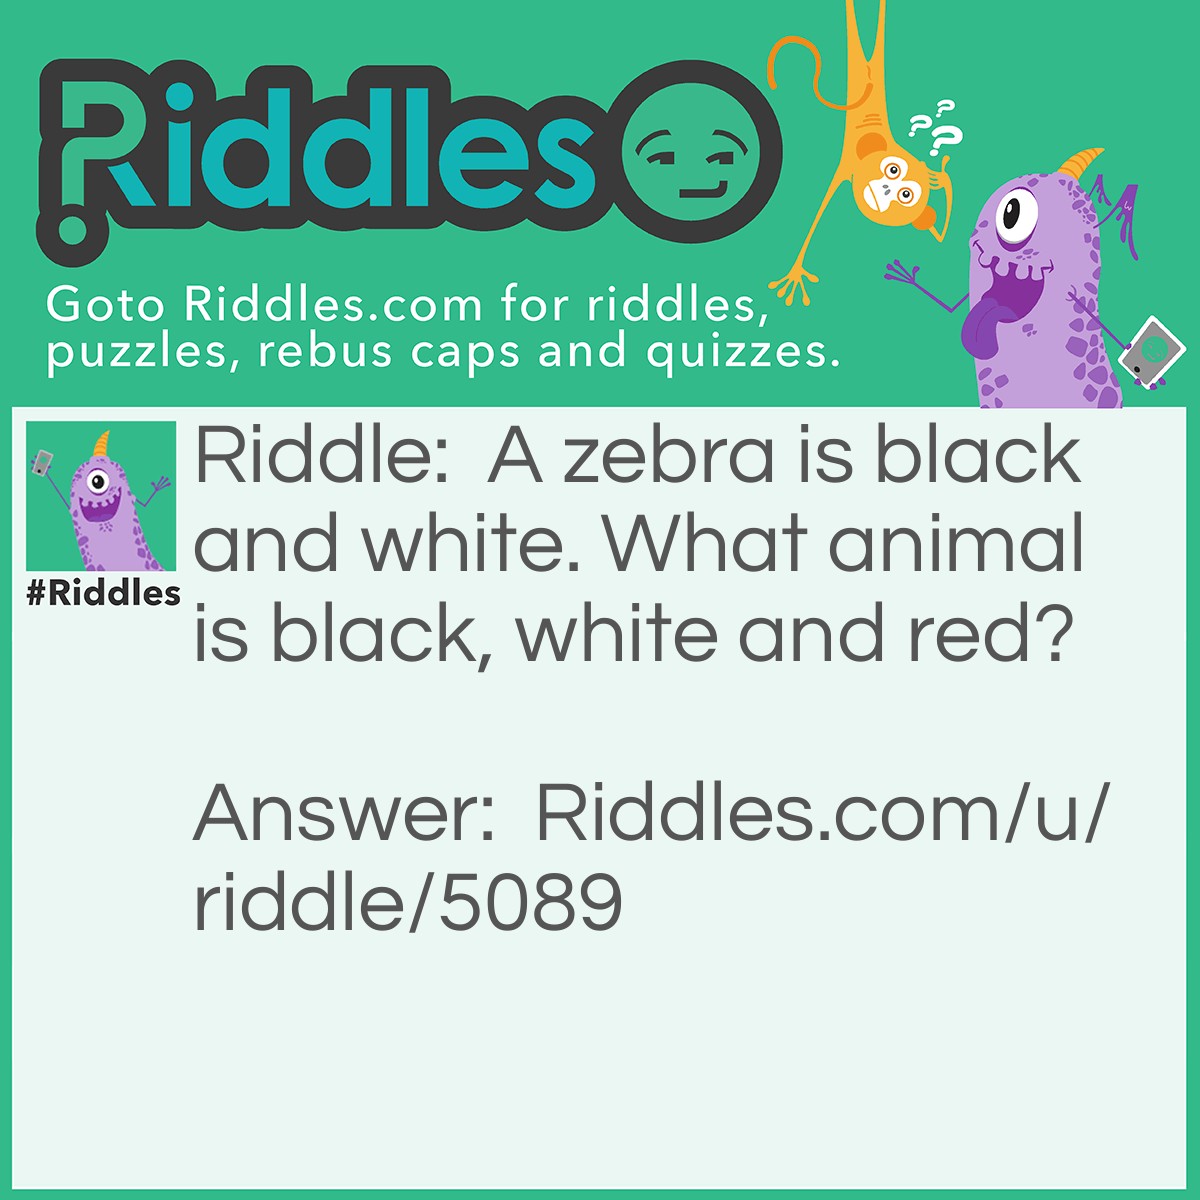 Riddle: A zebra is black and white. What animal is black, white and red? Answer: A shy zebra!